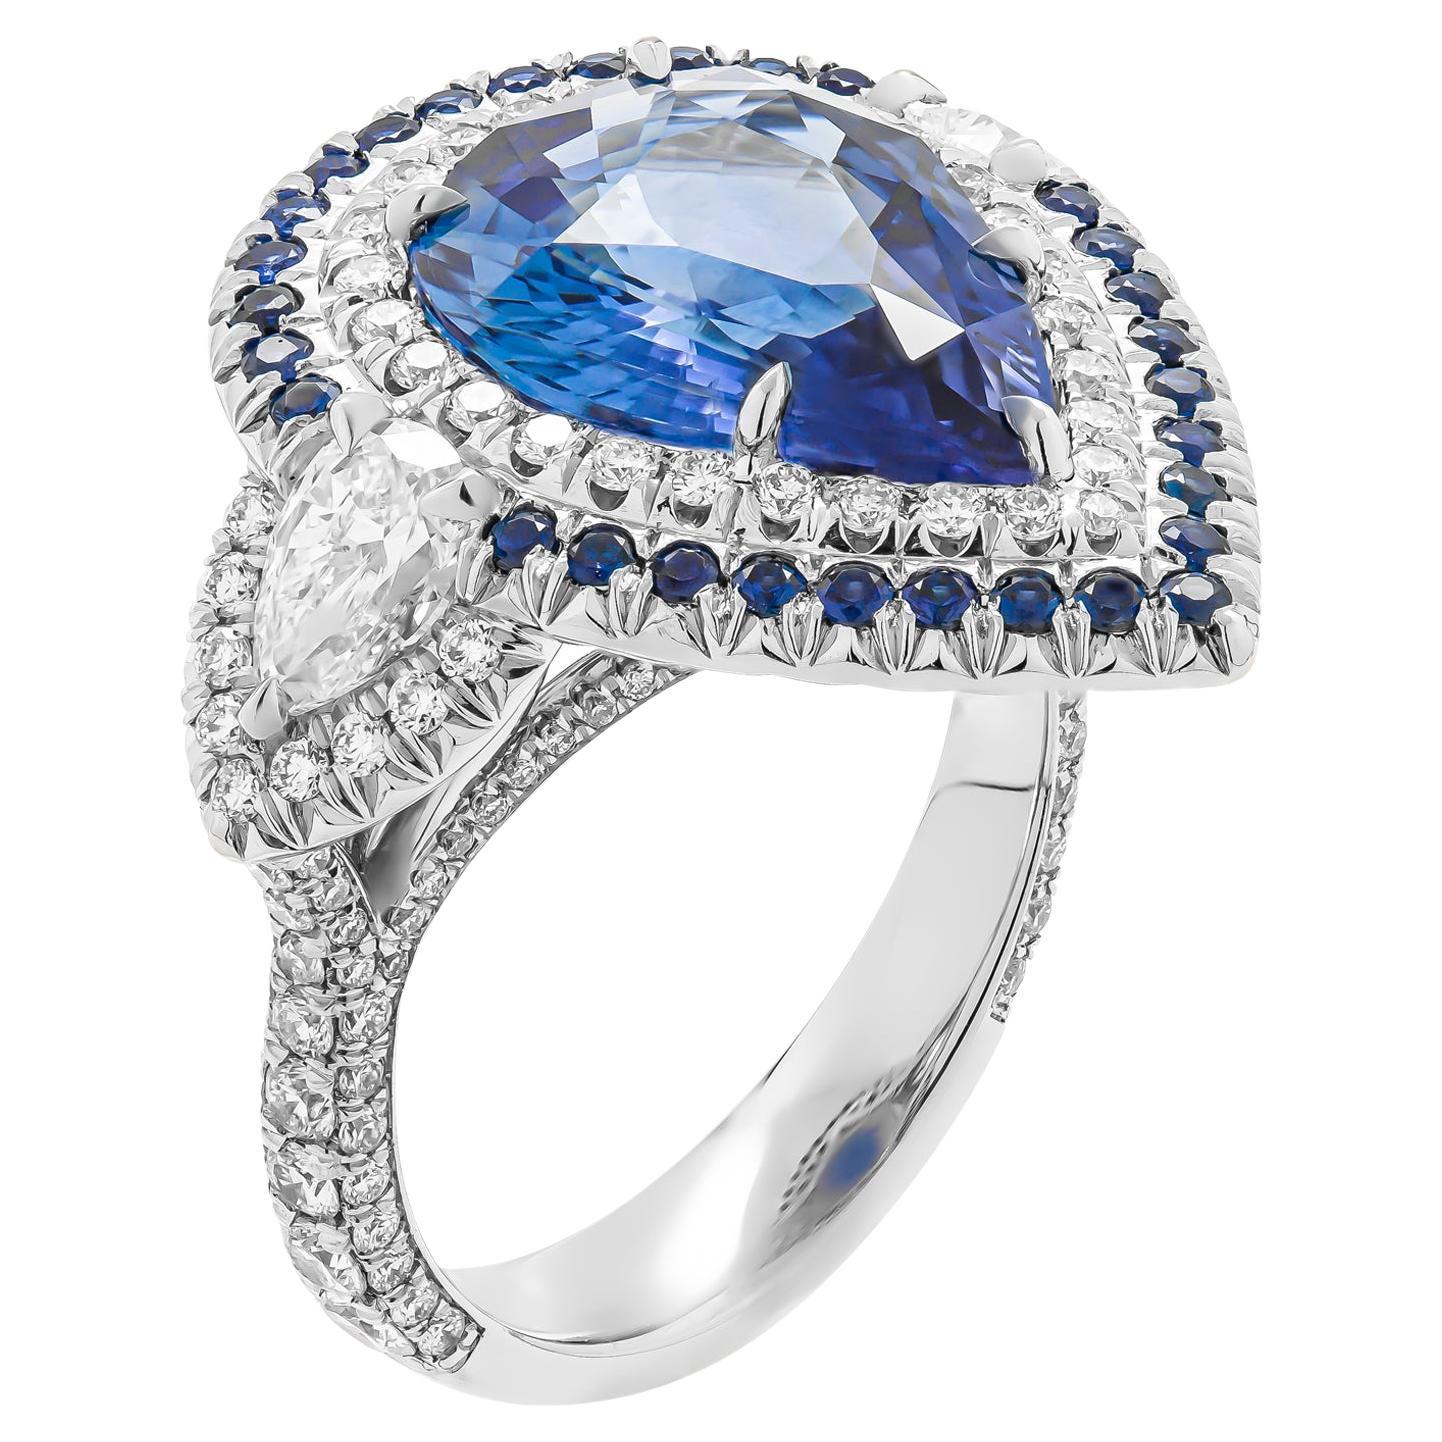 GIA Certified 3-Stone Ring with 5.04 Carat Sapphire Pear Shape For Sale